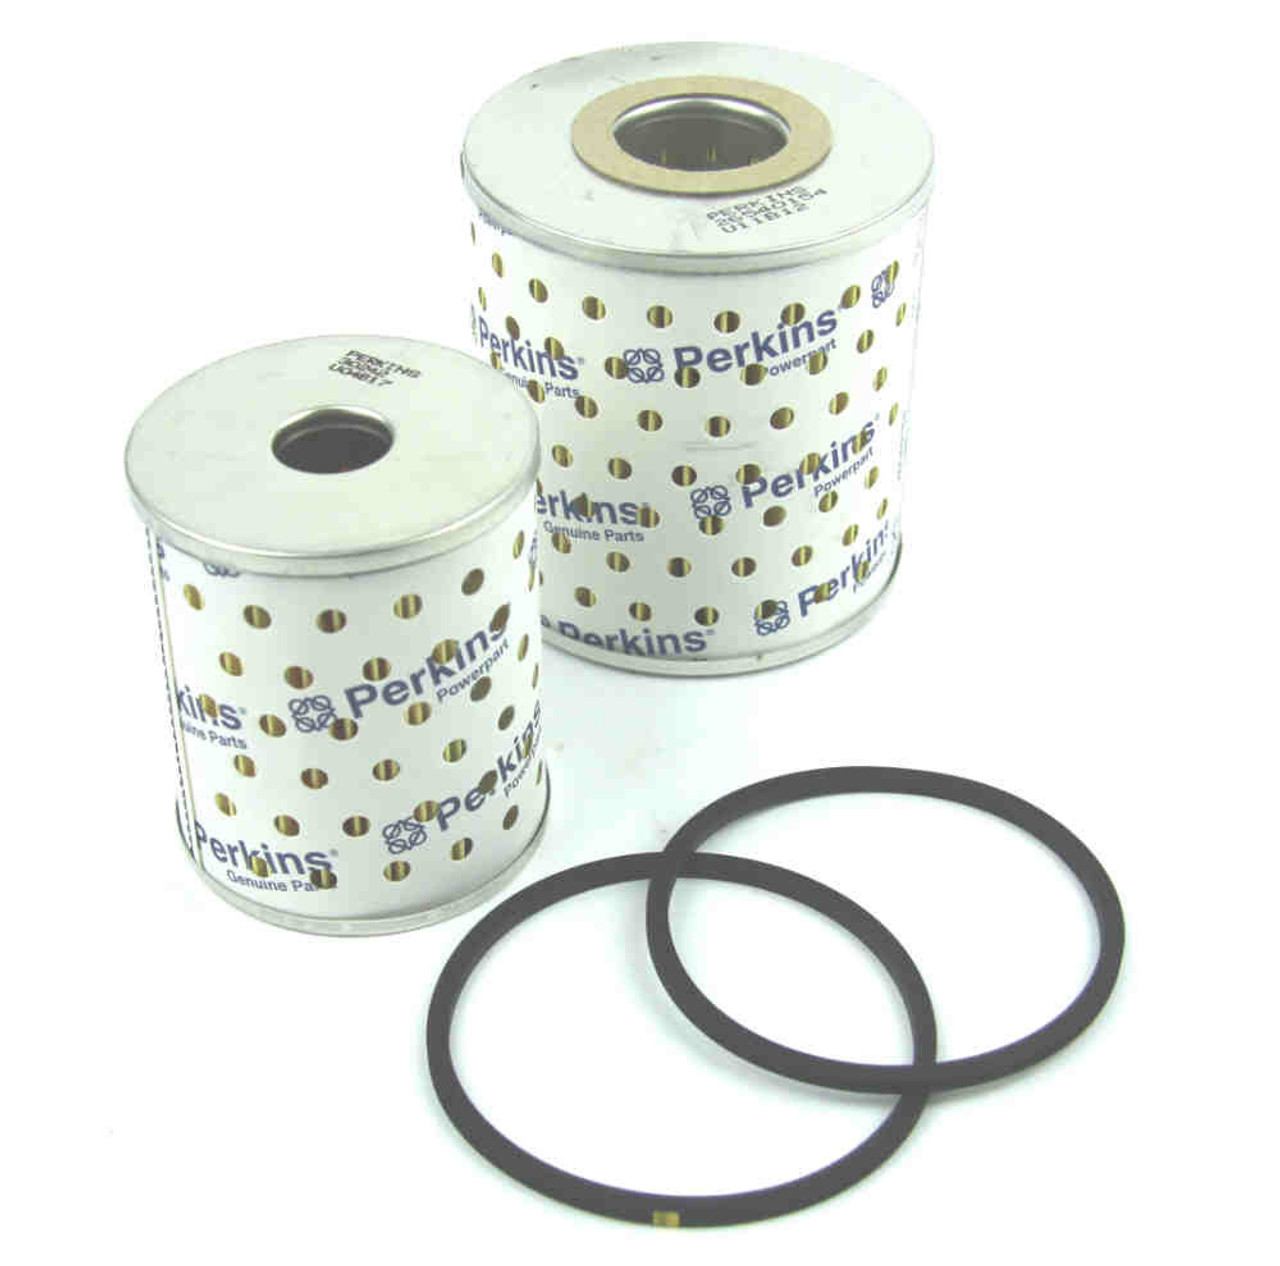  Perkins  4 108 fuel and oil  filters 